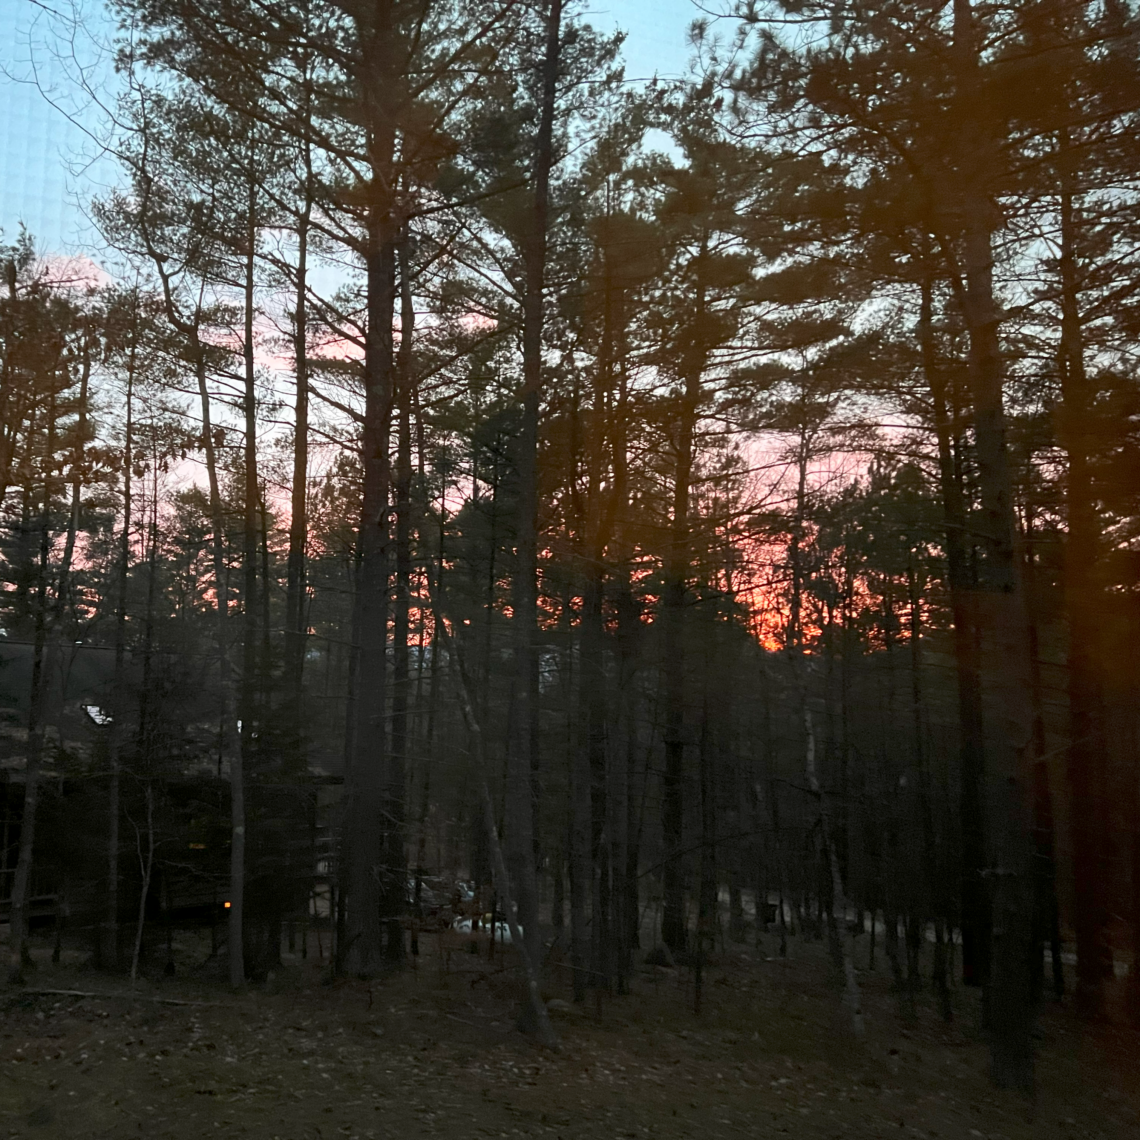 The light of the sunset through the forest near our cabin.